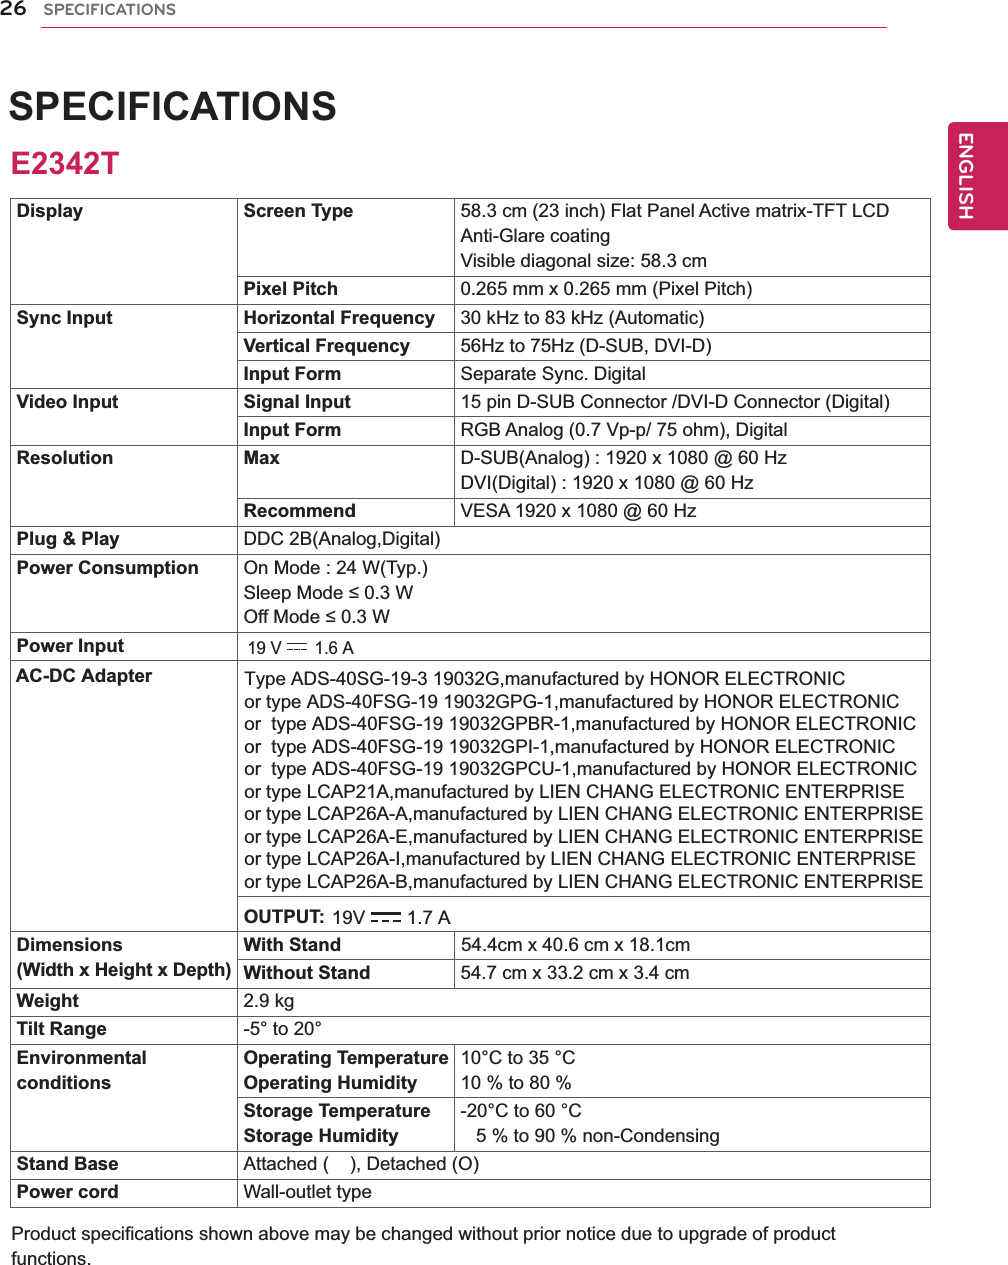 ENGENGLISHSPECIFICATIONSProduct specifications shown above may be changed without prior notice due to upgrade of product functions.26 SPECIFICATIONSDisplay Screen Type 58.3 cm (23 inch) Flat Panel Active matrix-TFT LCDAnti-Glare coatingVisible diagonal size: 58.3 cmPixel Pitch 0.265 mm x 0.265 mm (Pixel Pitch)Sync Input Horizontal Frequency 30 kHz to 83 kHz (Automatic)Vertical Frequency 56Hz to 75Hz (D-SUB, DVI-D)Input Form Separate Sync. DigitalVideo Input Signal Input 15 pin D-SUB Connector /DVI-D Connector (Digital)Input Form RGB Analog (0.7 Vp-p/ 75 ohm), DigitalResolution Max D-SUB(Analog) : 1920 x 1080 @ 60 HzDVI(Digital) : 1920 x 1080 @ 60 HzRecommend VESA 1920 x 1080 @ 60 HzPlug &amp; Play DDC 2B(Analog,Digital)Power Consumption On Mode : 24 W(Typ.)Sleep Mode ≤ 0.3 W Off Mode ≤ 0.3 W Power InputDimensions(Width x Height x Depth)With Stand                       54.4cm x 40.6 cm x 18.1cmWithout Stand 54.7 cm x 33.2 cm x 3.4 cmWeight 2.9 kgTilt Range -5° to 20°EnvironmentalconditionsOperating TemperatureOperating Humidity10°C to 35 °C10 % to 80 % Storage TemperatureStorage Humidity-20°C to 60 °C   5 % to 90 % non-CondensingStand Base Attached (    ), Detached (O)Power cord Wall-outlet typeE2342T19 V 1.6 A AC-DC Adapter19V 1.7 AType ADS-40SG-19-3 19032G,manufactured by HONOR ELECTRONICor type ADS-40FSG-19 19032GPG-1,manufactured by HONOR ELECTRONICor  type ADS-40FSG-19 19032GPBR-1,manufactured by HONOR ELECTRONICor  type ADS-40FSG-19 19032GPI-1,manufactured by HONOR ELECTRONIC or  type ADS-40FSG-19 19032GPCU-1,manufactured by HONOR ELECTRONIC or type LCAP21A,manufactured by LIEN CHANG ELECTRONIC ENTERPRISEor type LCAP26A-A,manufactured by LIEN CHANG ELECTRONIC ENTERPRISEor type LCAP26A-E,manufactured by LIEN CHANG ELECTRONIC ENTERPRISEor type LCAP26A-I,manufactured by LIEN CHANG ELECTRONIC ENTERPRISEor type LCAP26A-B,manufactured by LIEN CHANG ELECTRONIC ENTERPRISEOUTPUT: